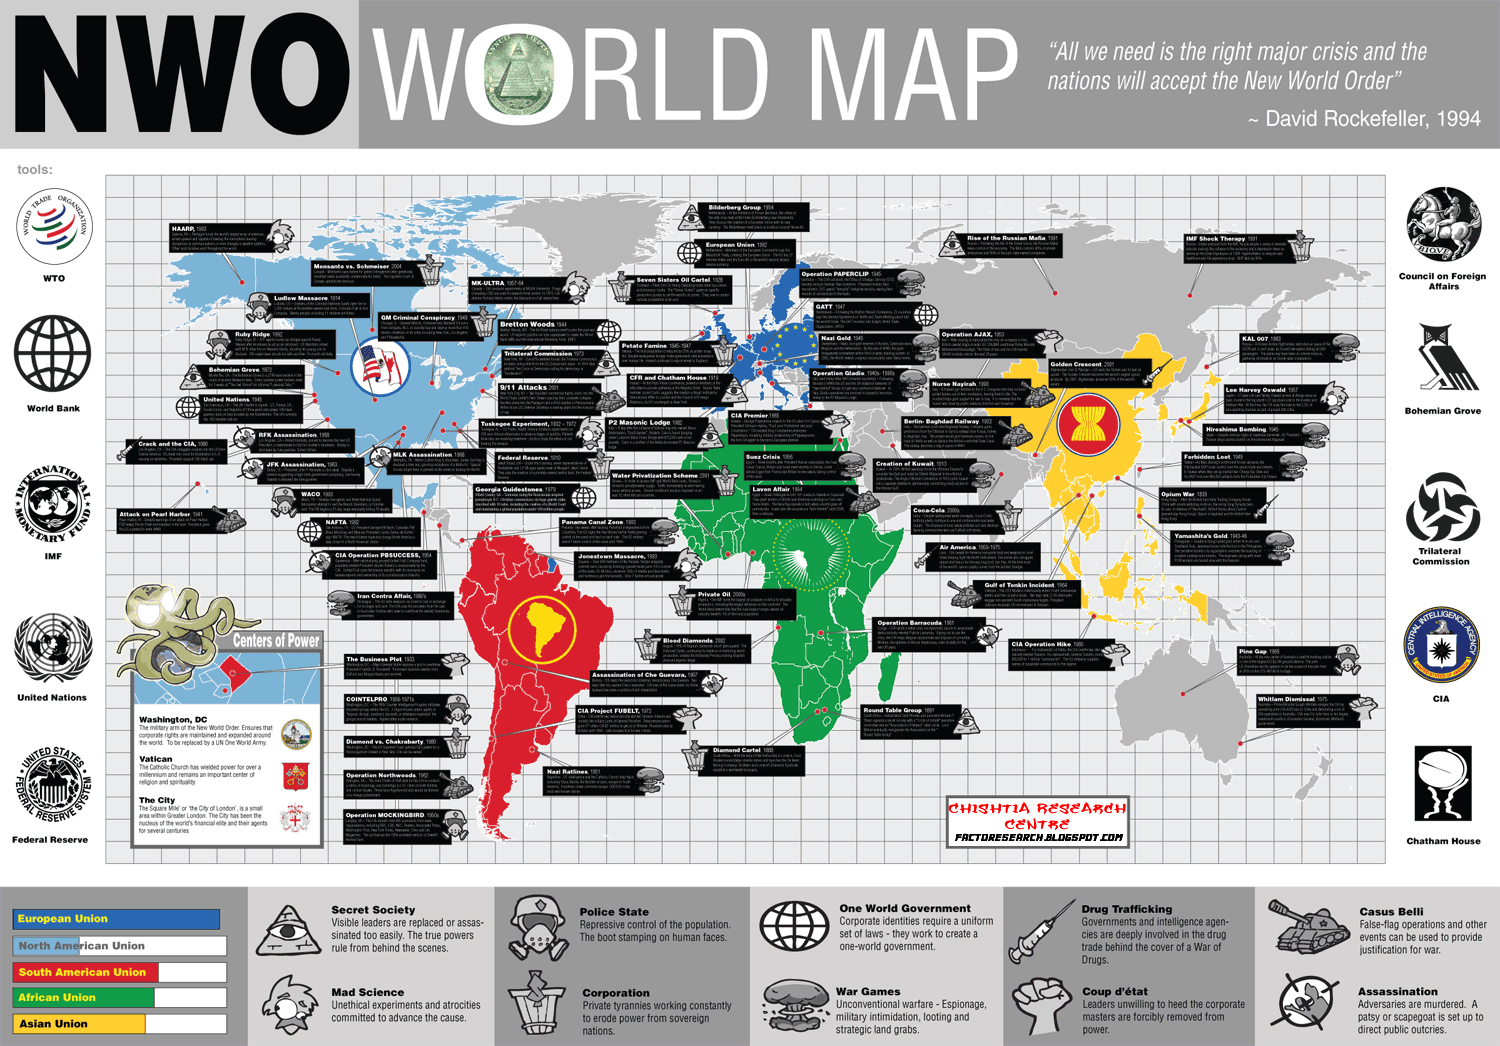 The World of Research New World Order (World Map)